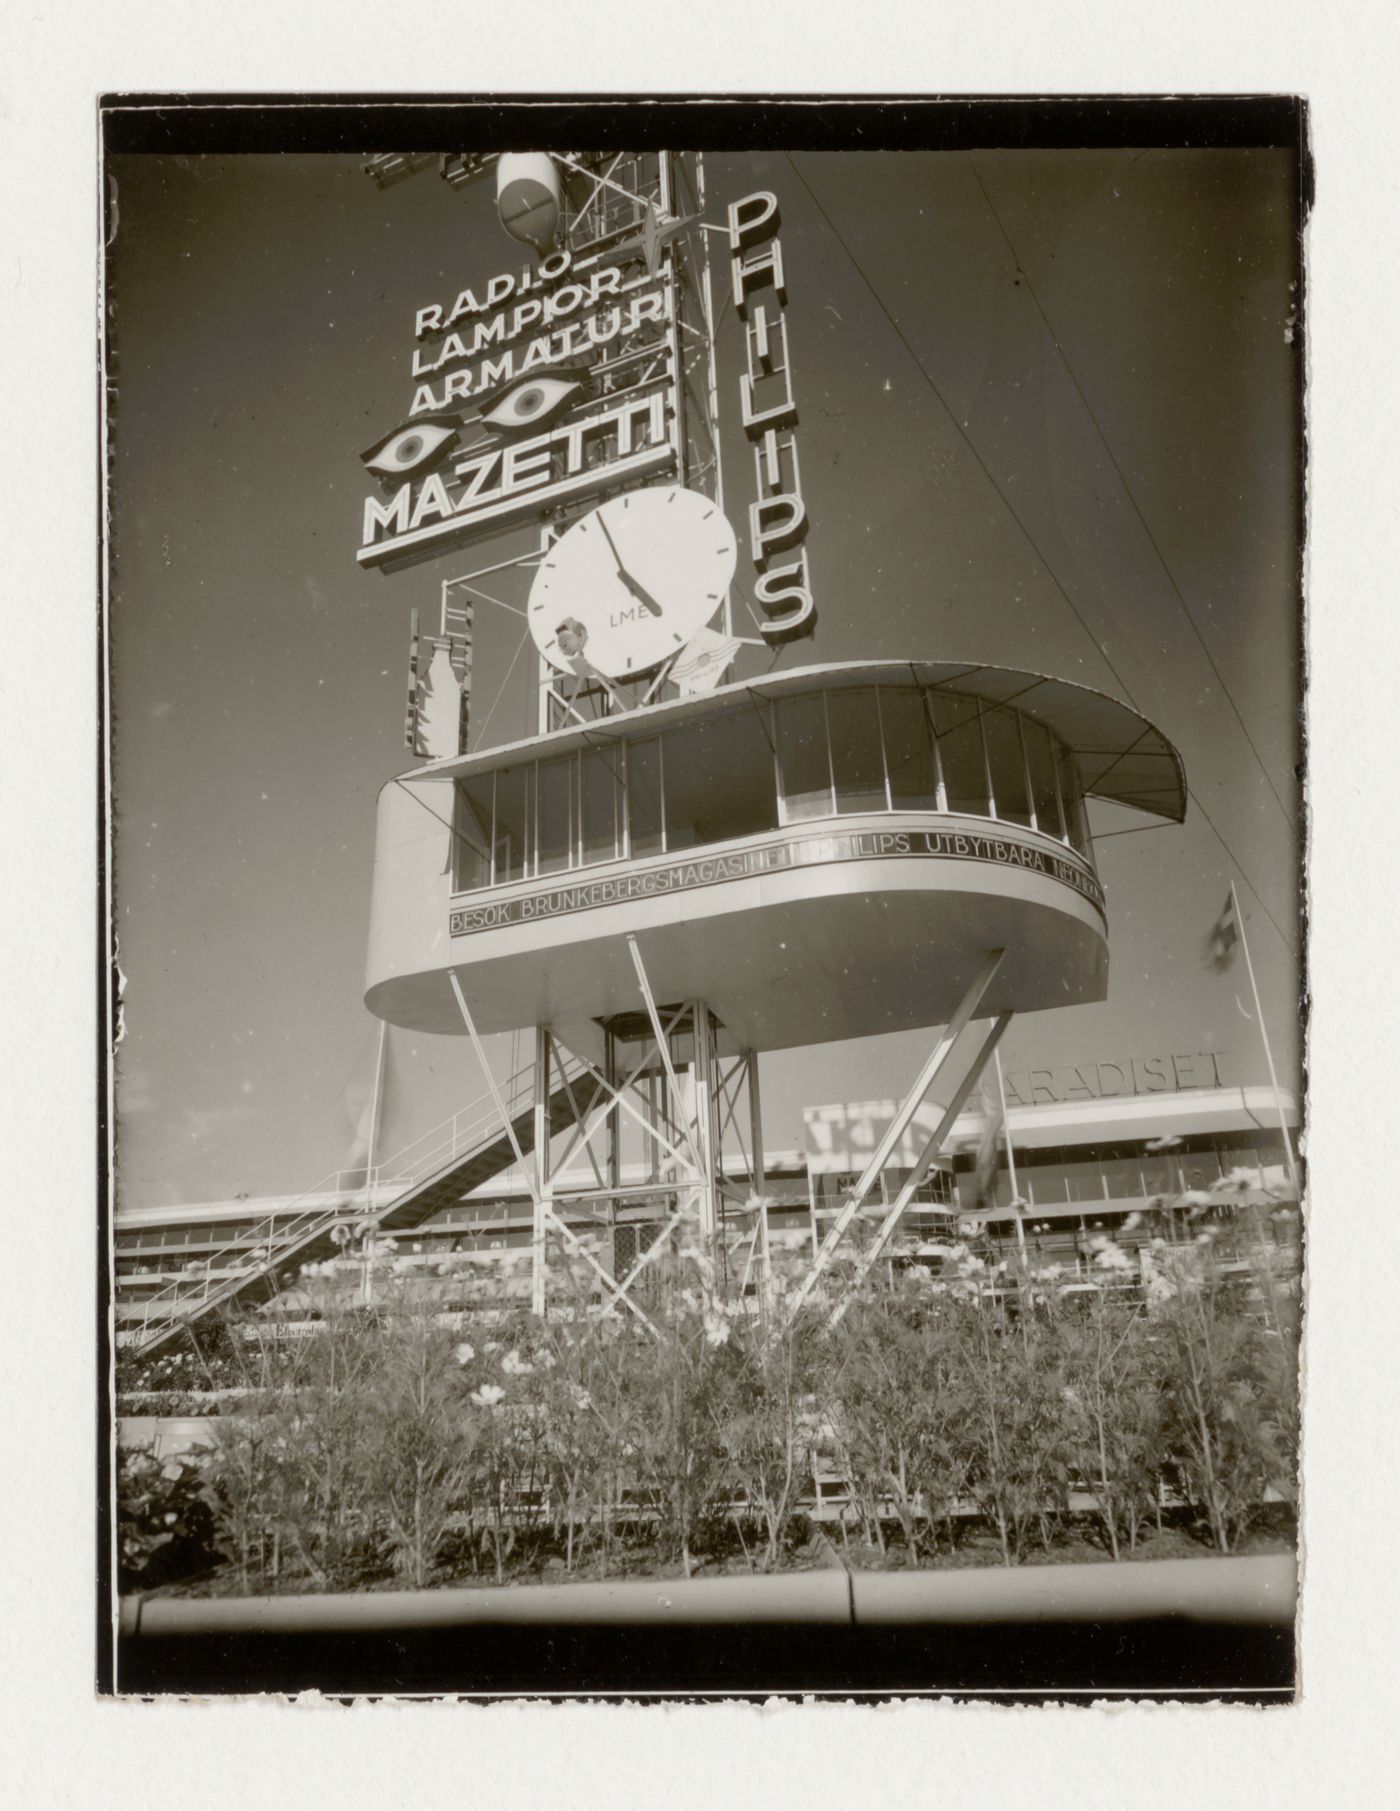 Exterior view of the base of the advertising mast and Paradise Restaurant at the Stockholm Exhibition of 1930, Stockholm